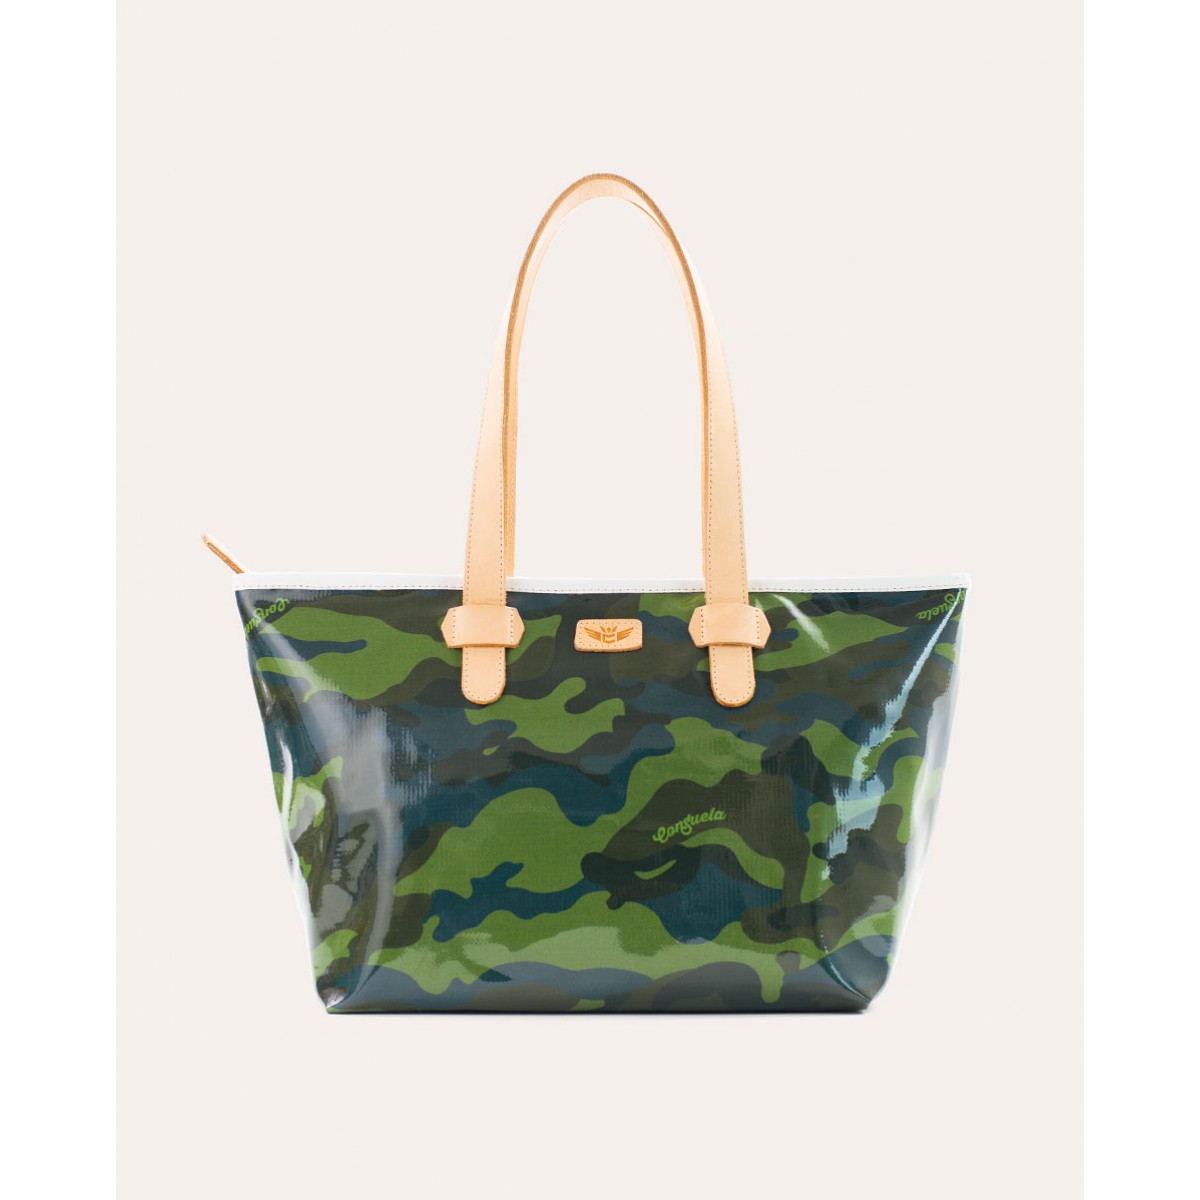 Consuela Bags Camo Legacy Shopper Tote by Consuela|The Lamp Stand